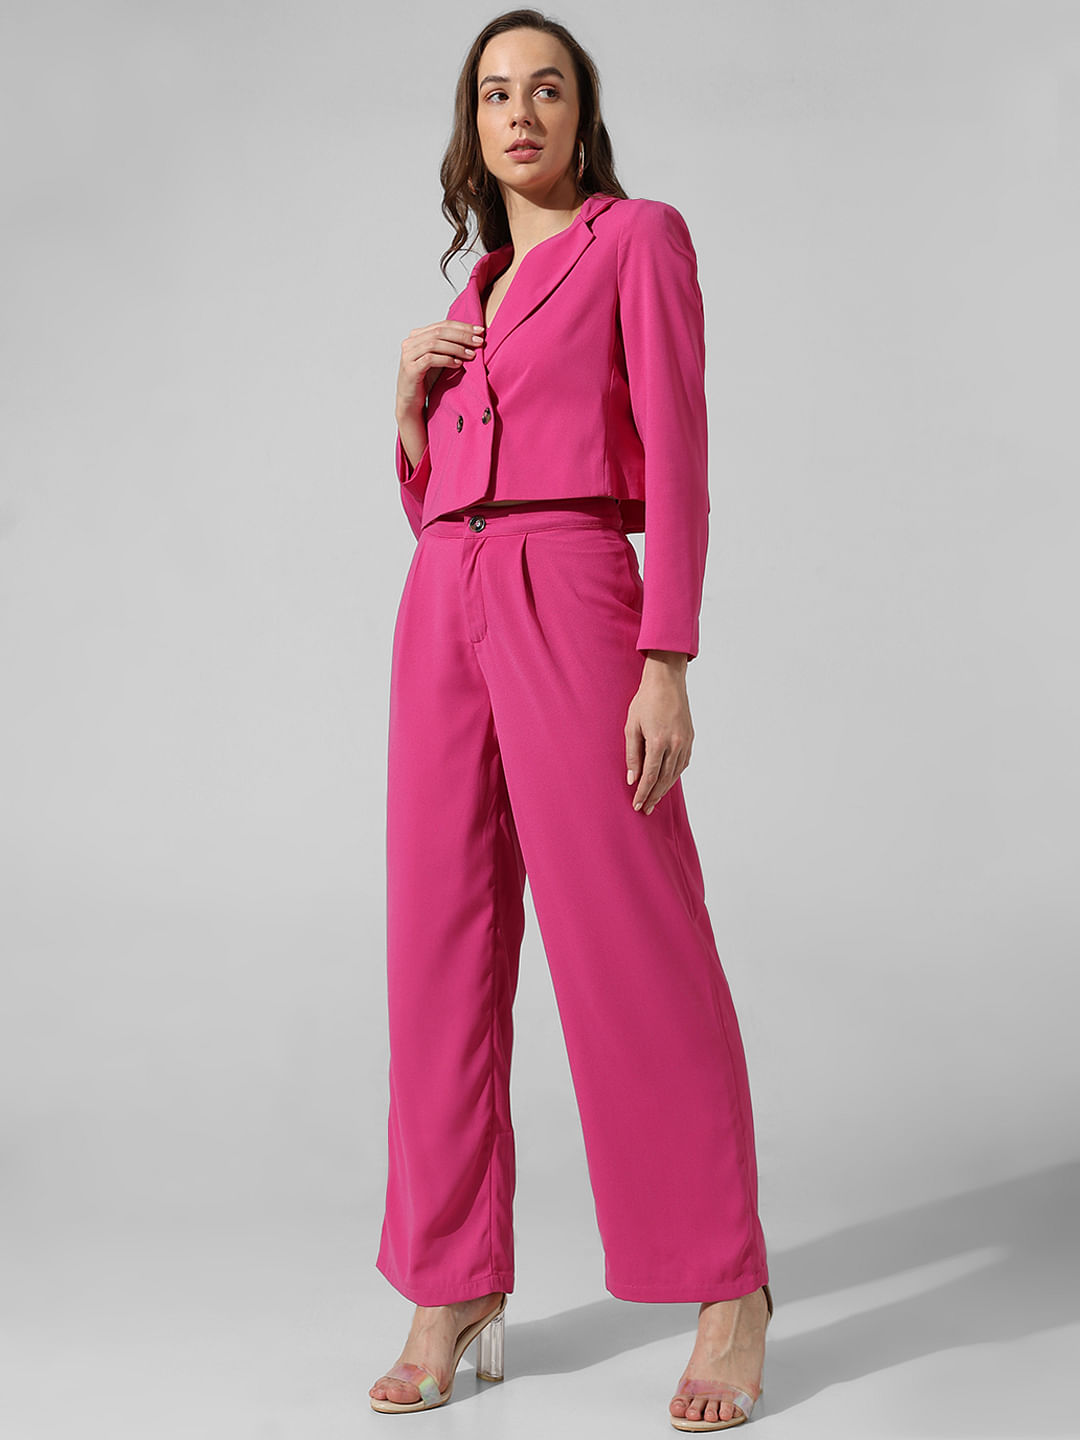 Tanya Control Top Faux Leather Pants in Hot Pink – Cranberry Boutique